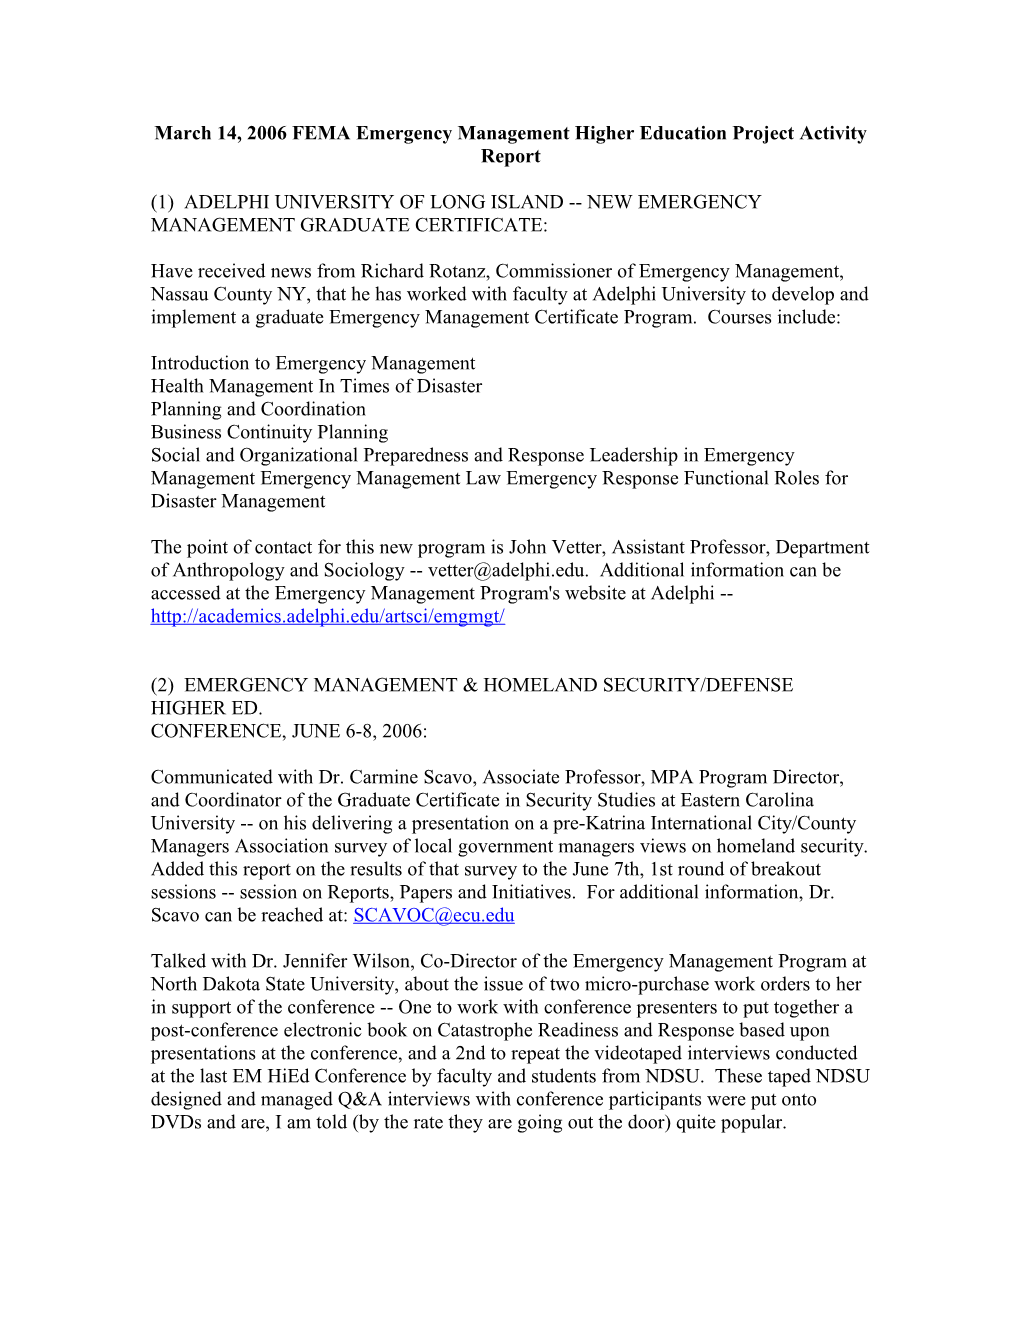 March 14, 2006 FEMA Emergency Management Higher Education Project Activity Report